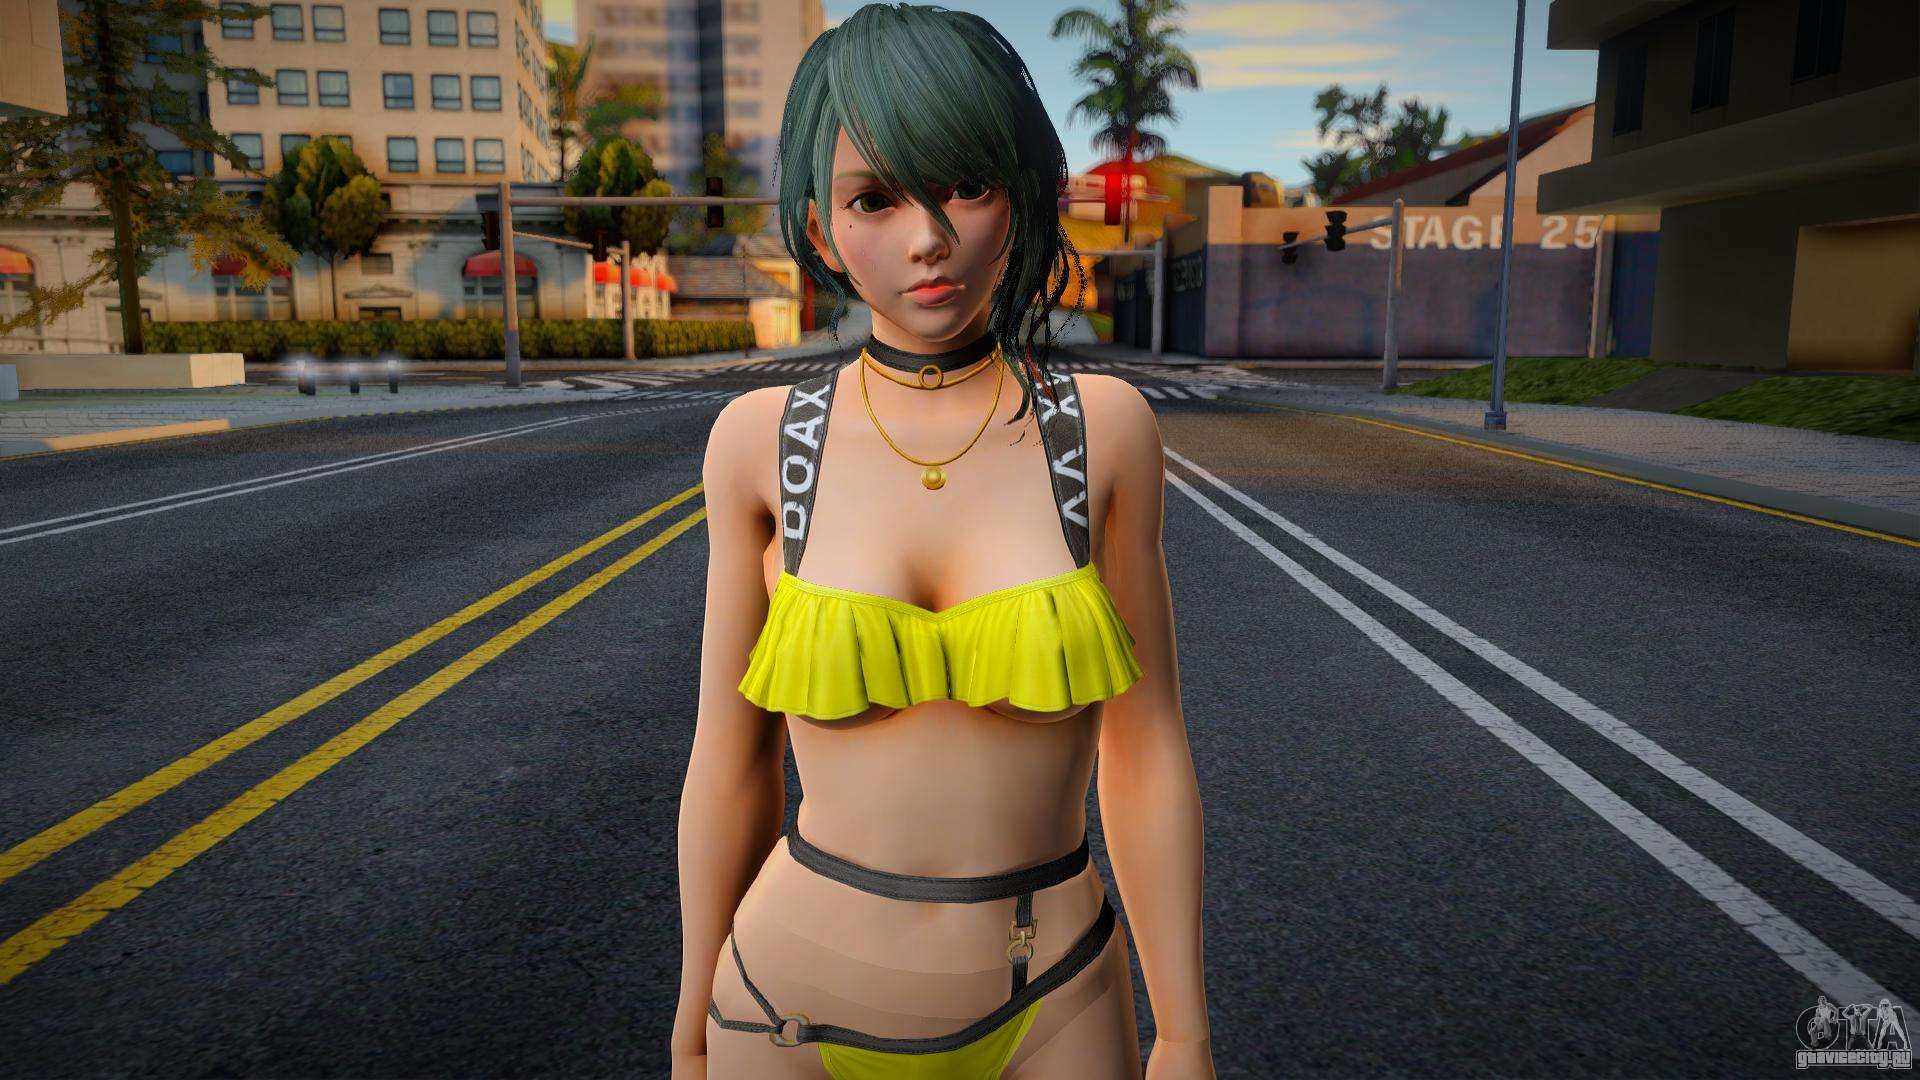 Gta san andreas free download for android mobogenie